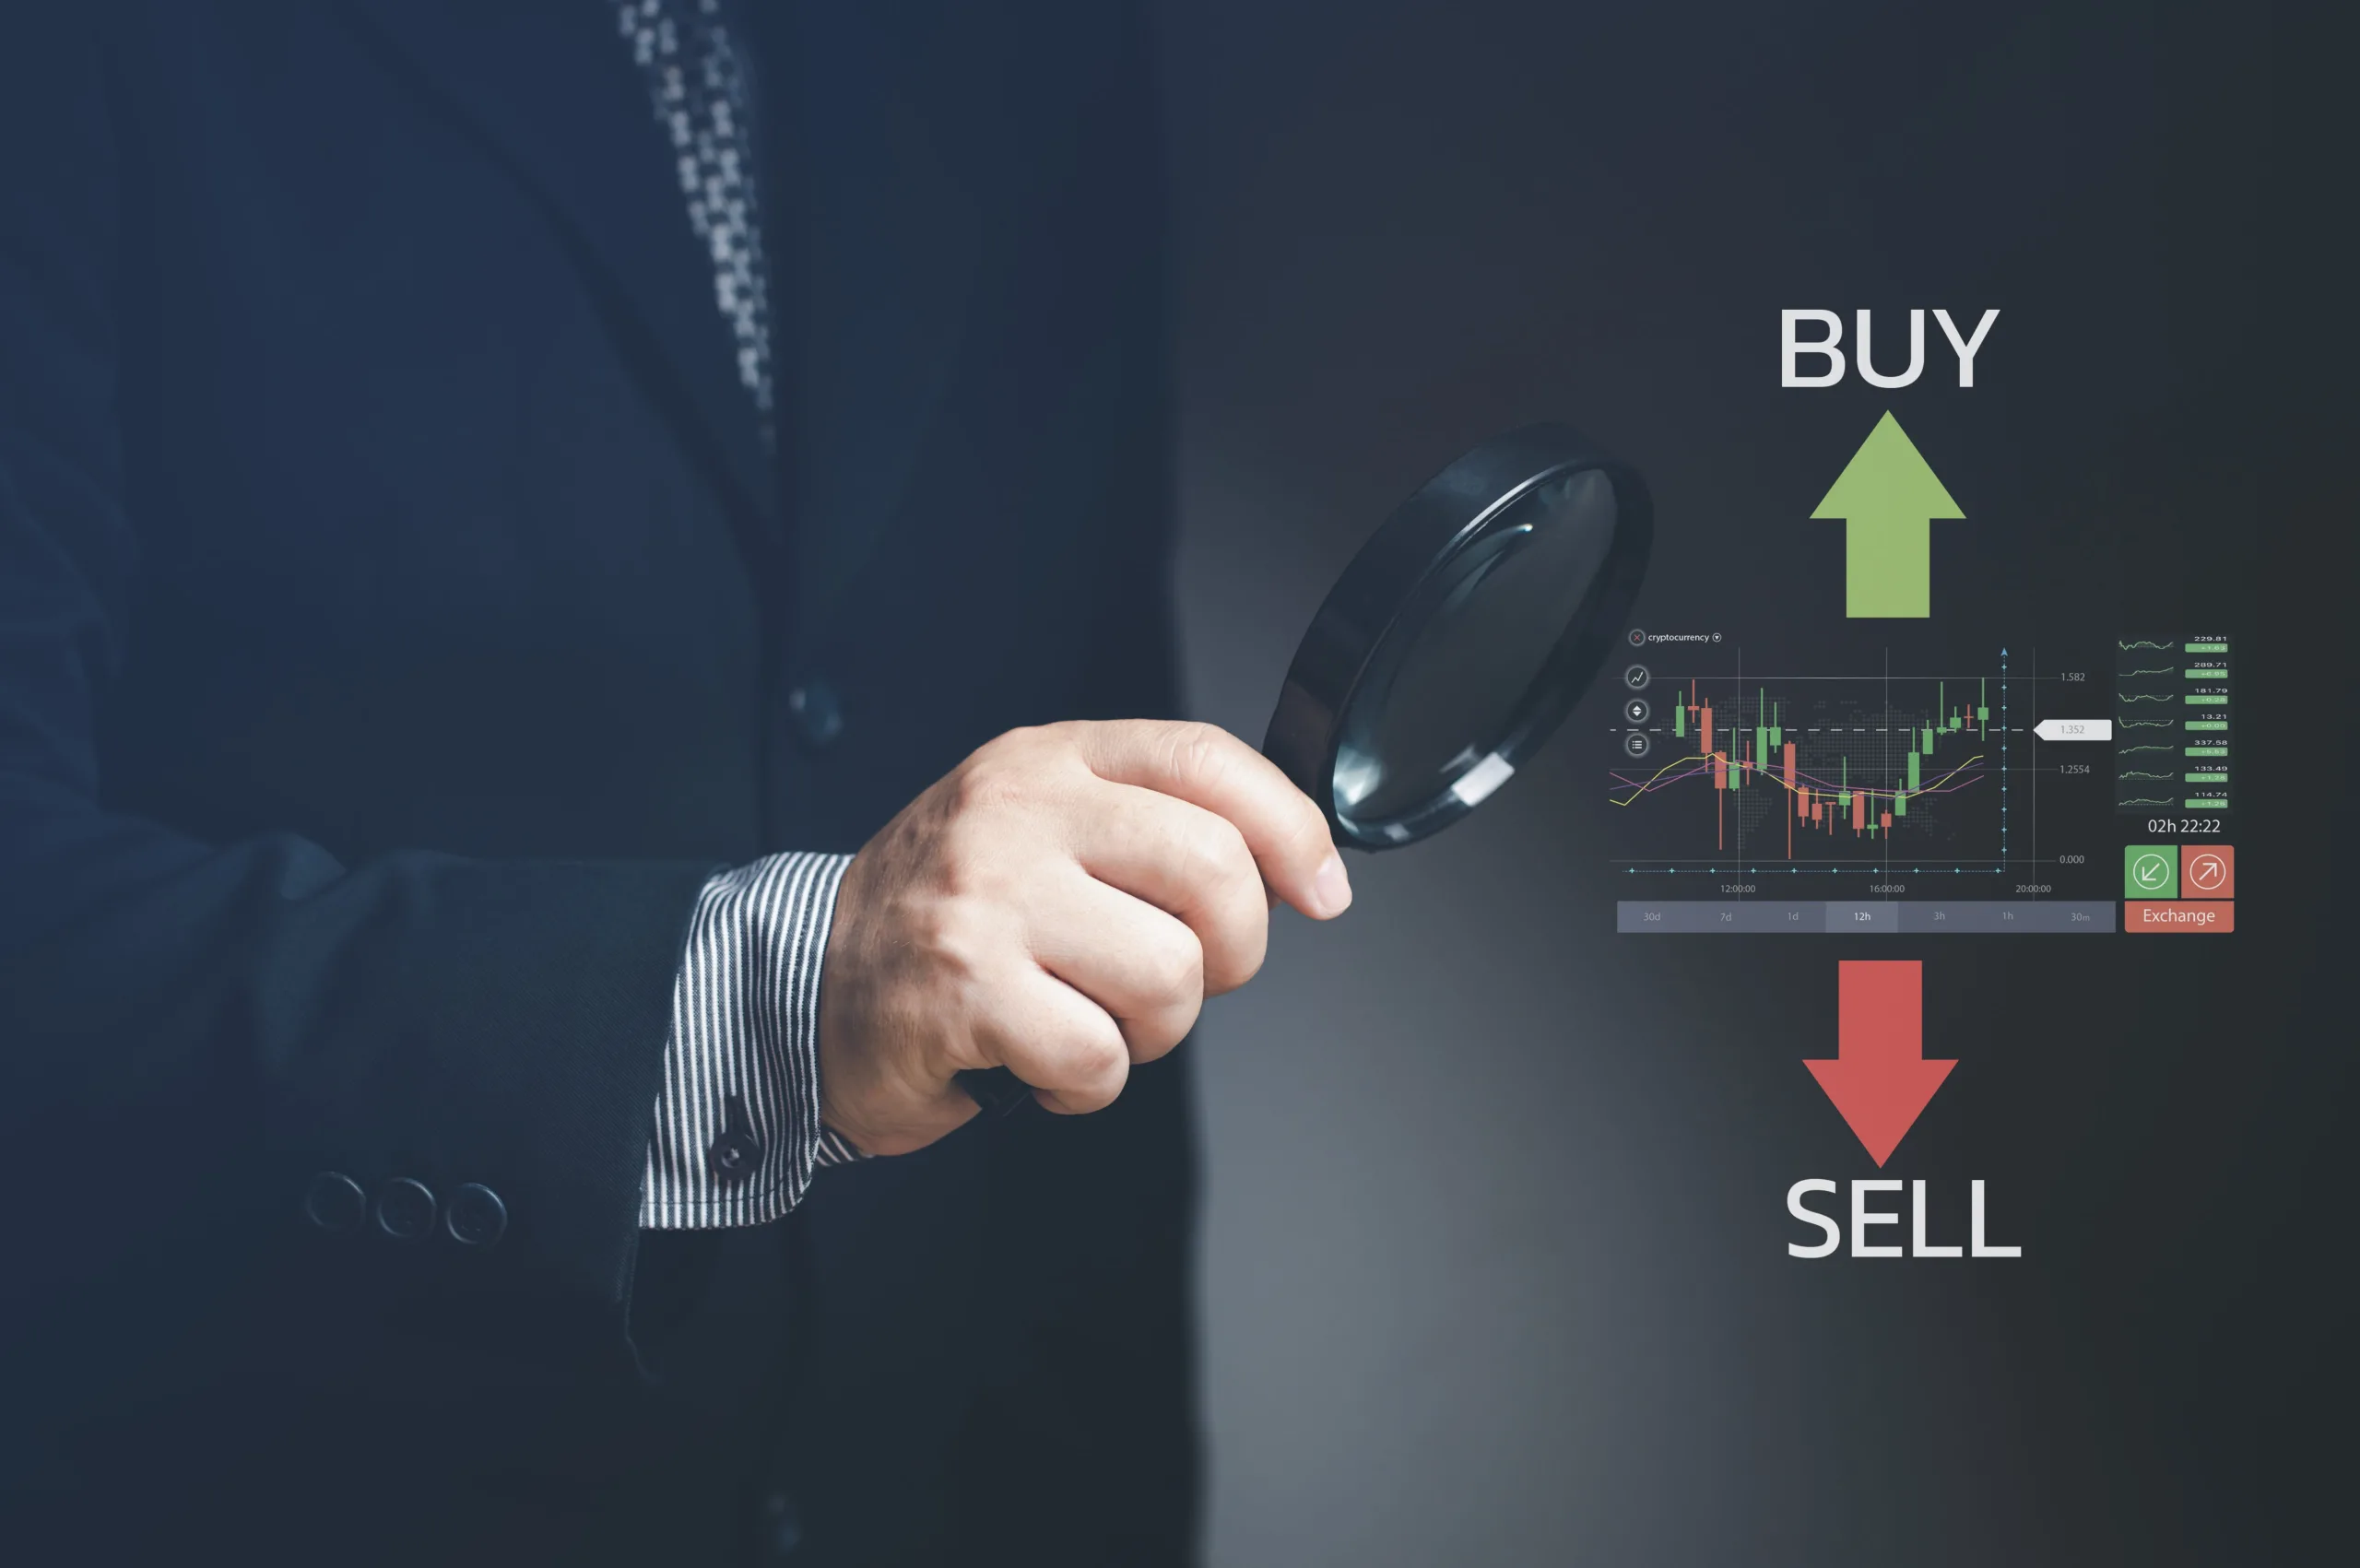 How to use margin trading effectively